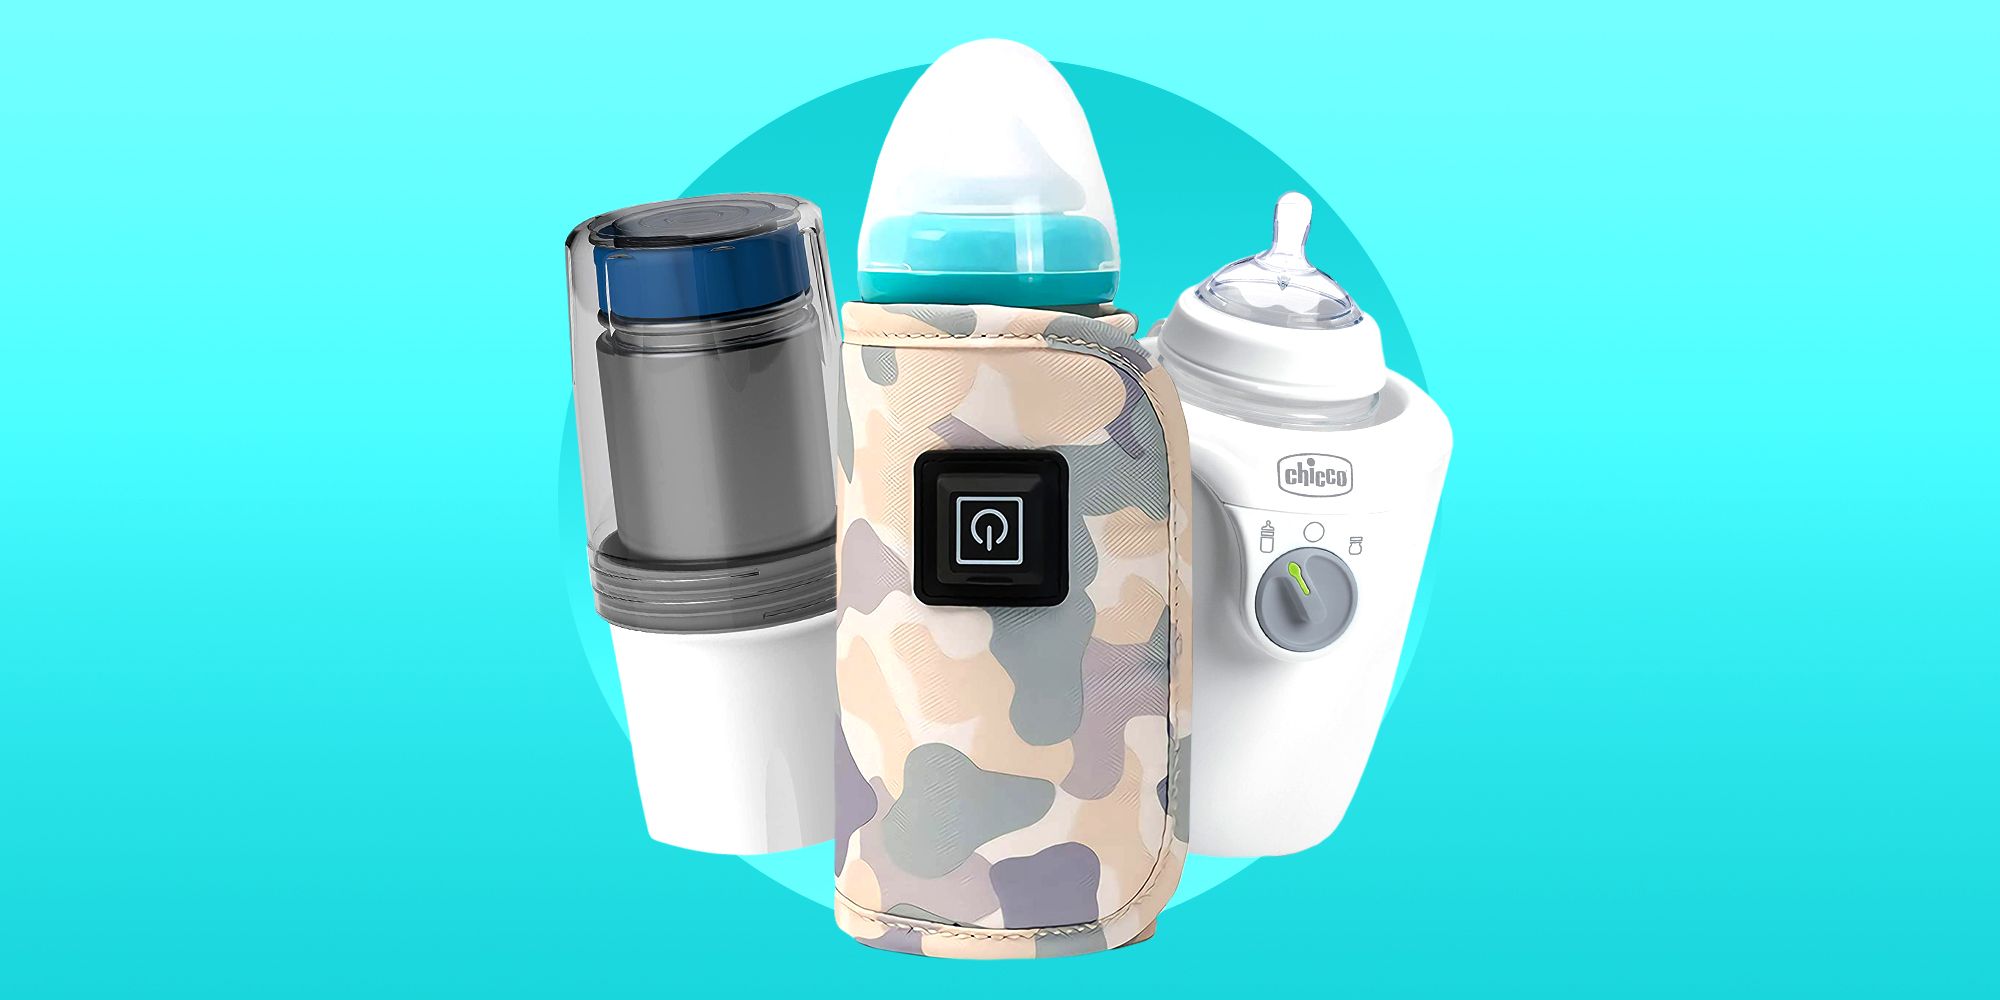 Timdle Bottle Warmer for Baby Milk Portable Baby Bottle Warmer Milk Bottle Warmer Meal Box Warmer for Car/Home/Traveling/Camping